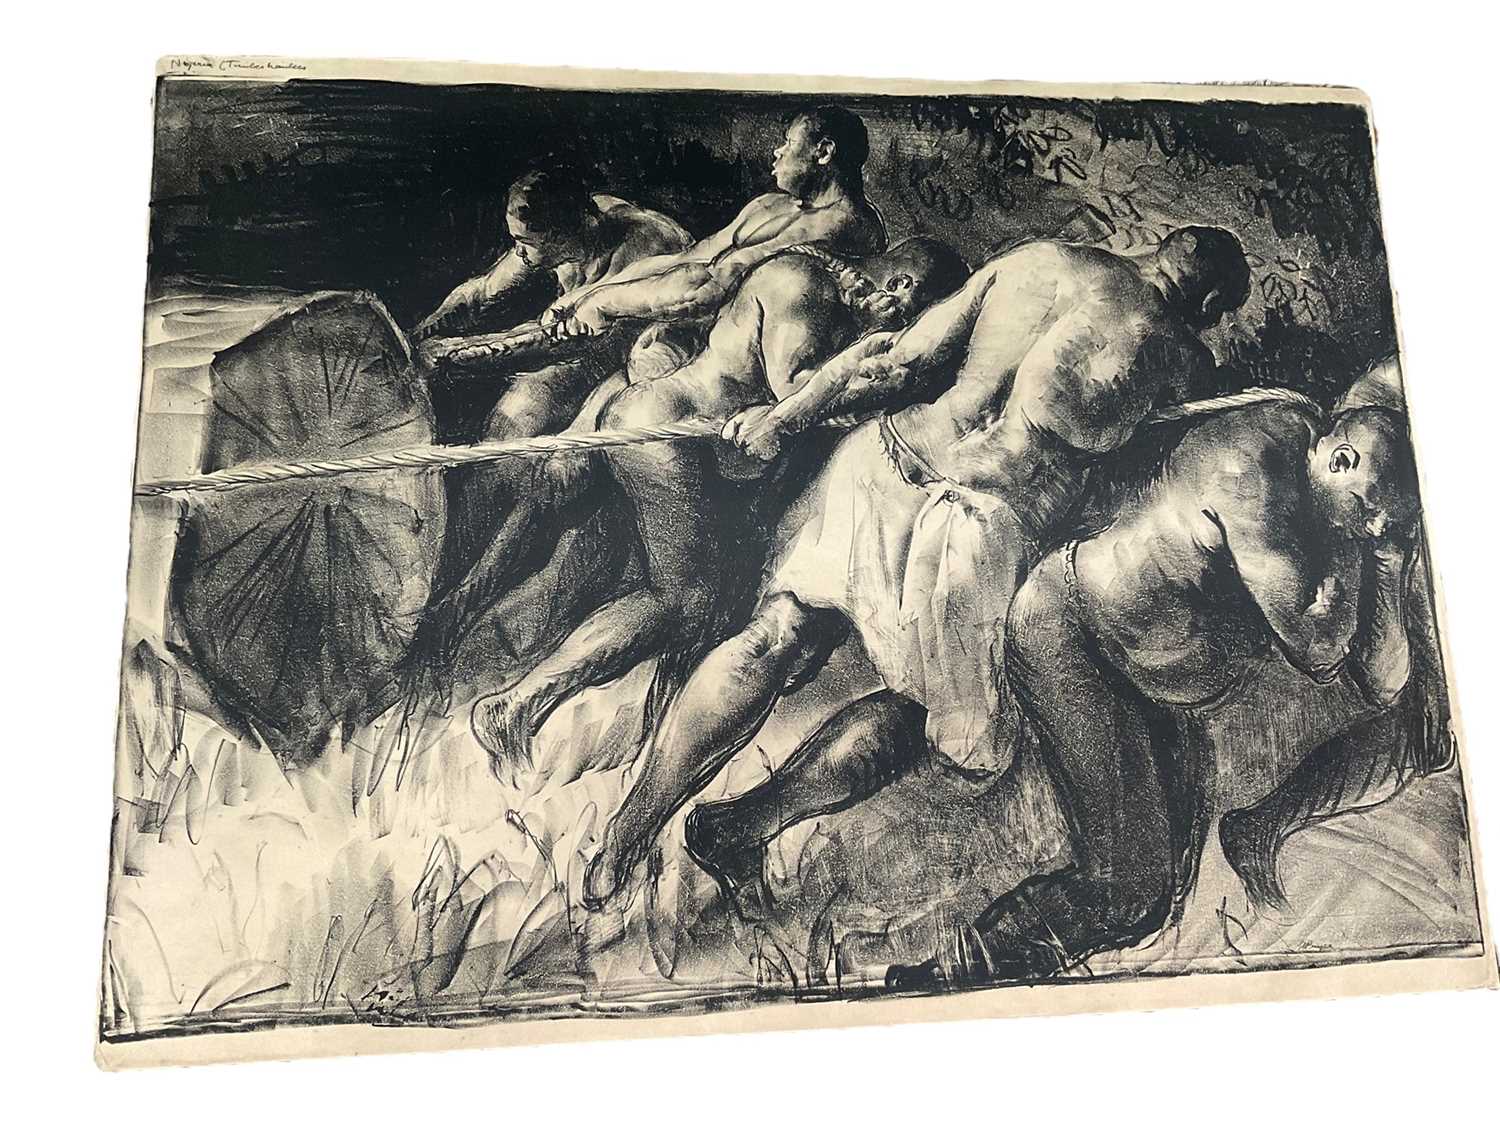 Lot 74 - Gerald Spencer Pryse (1882-1956) black and white lithograph, Scenes of the Empire series - Hauling timber, signed, image 89 x 125cm. NB - Produced for the 1924 British Empire Exhibition, this is a...